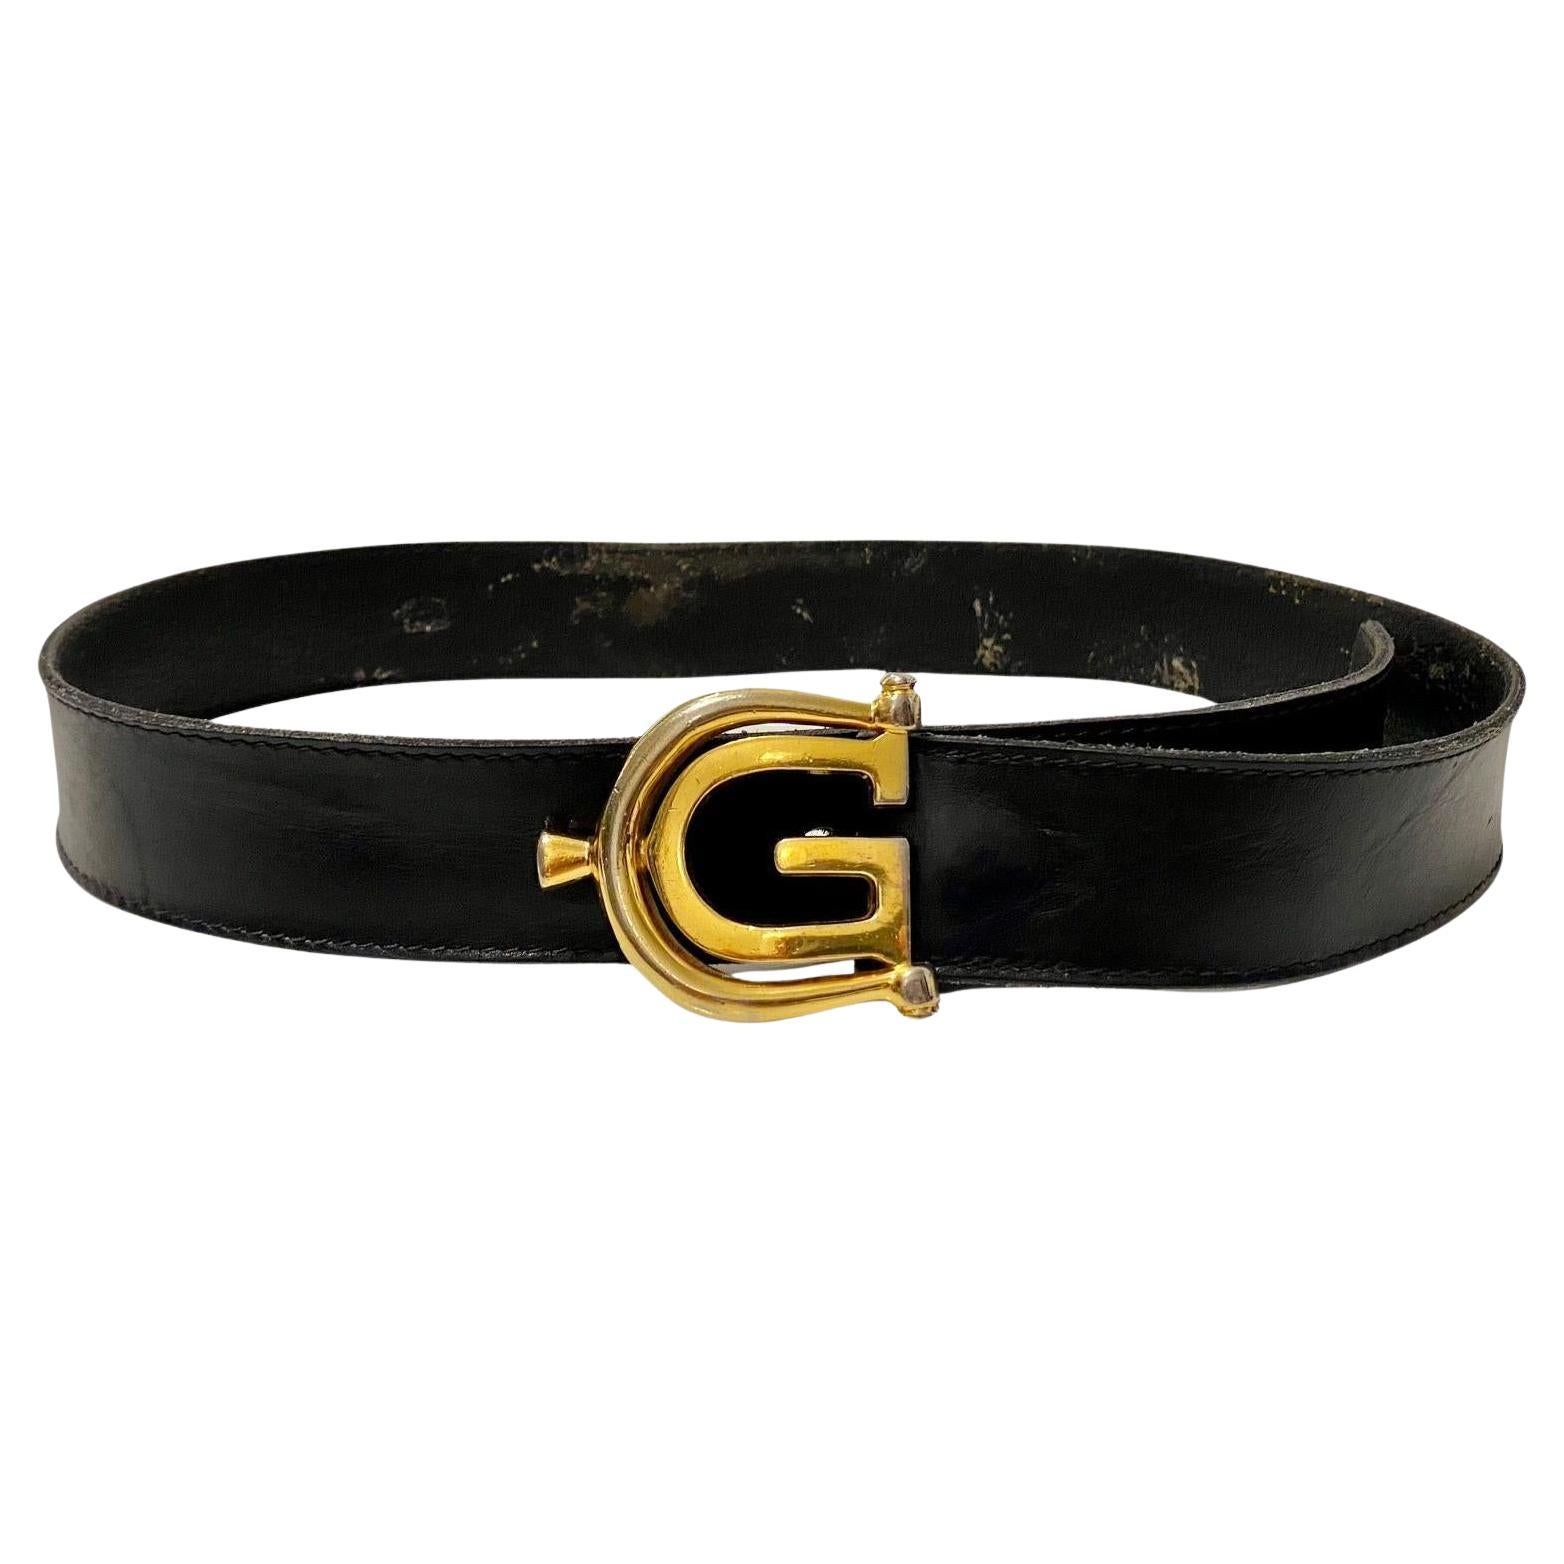 Crafted in Italy, this sleek black leather belt from Gucci boasts a lustrous gold-tone GG metal buckle.

Condition: vintage, 1980s, overall good, minimal sign of wear 

Measurements: 85x4cm - 33x1.6in 

Size: 70